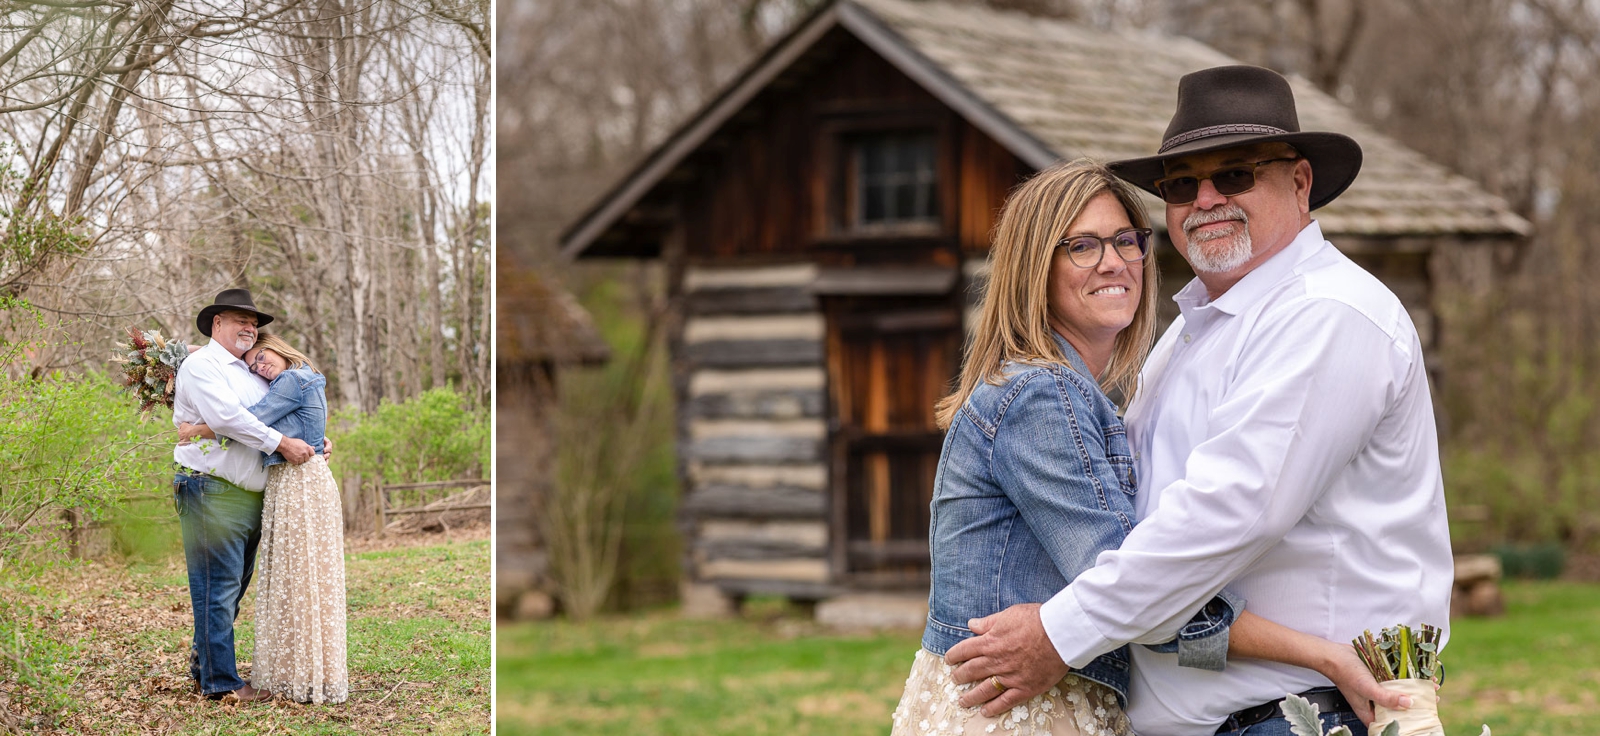 bride and groom pose for photo in front of rustic cabin 